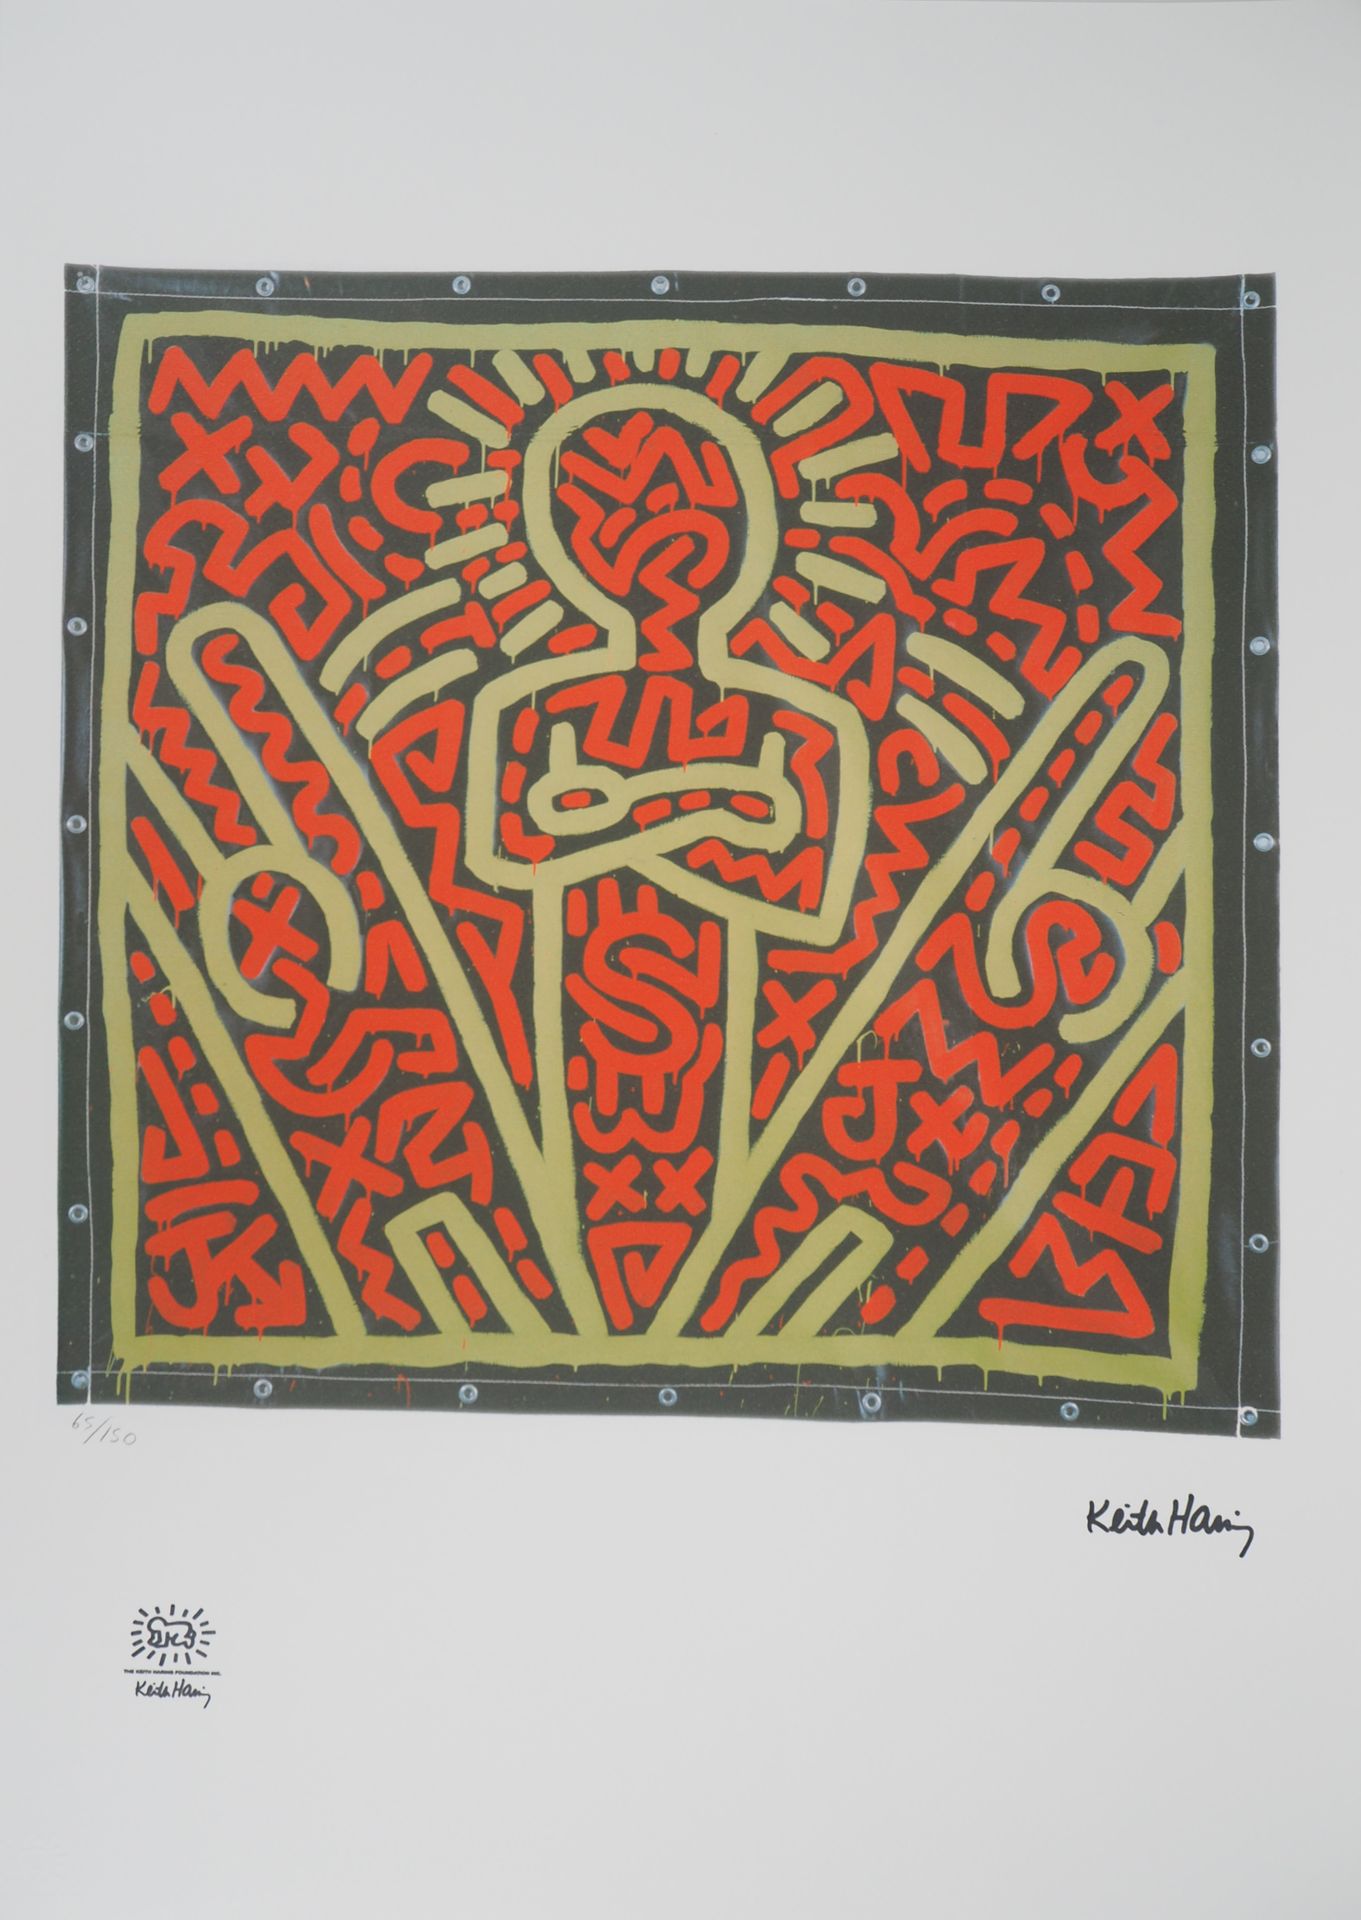 KEITH HARING Keith Haring (after)

Soumission

Screenprint on Vellum

Signed in &hellip;